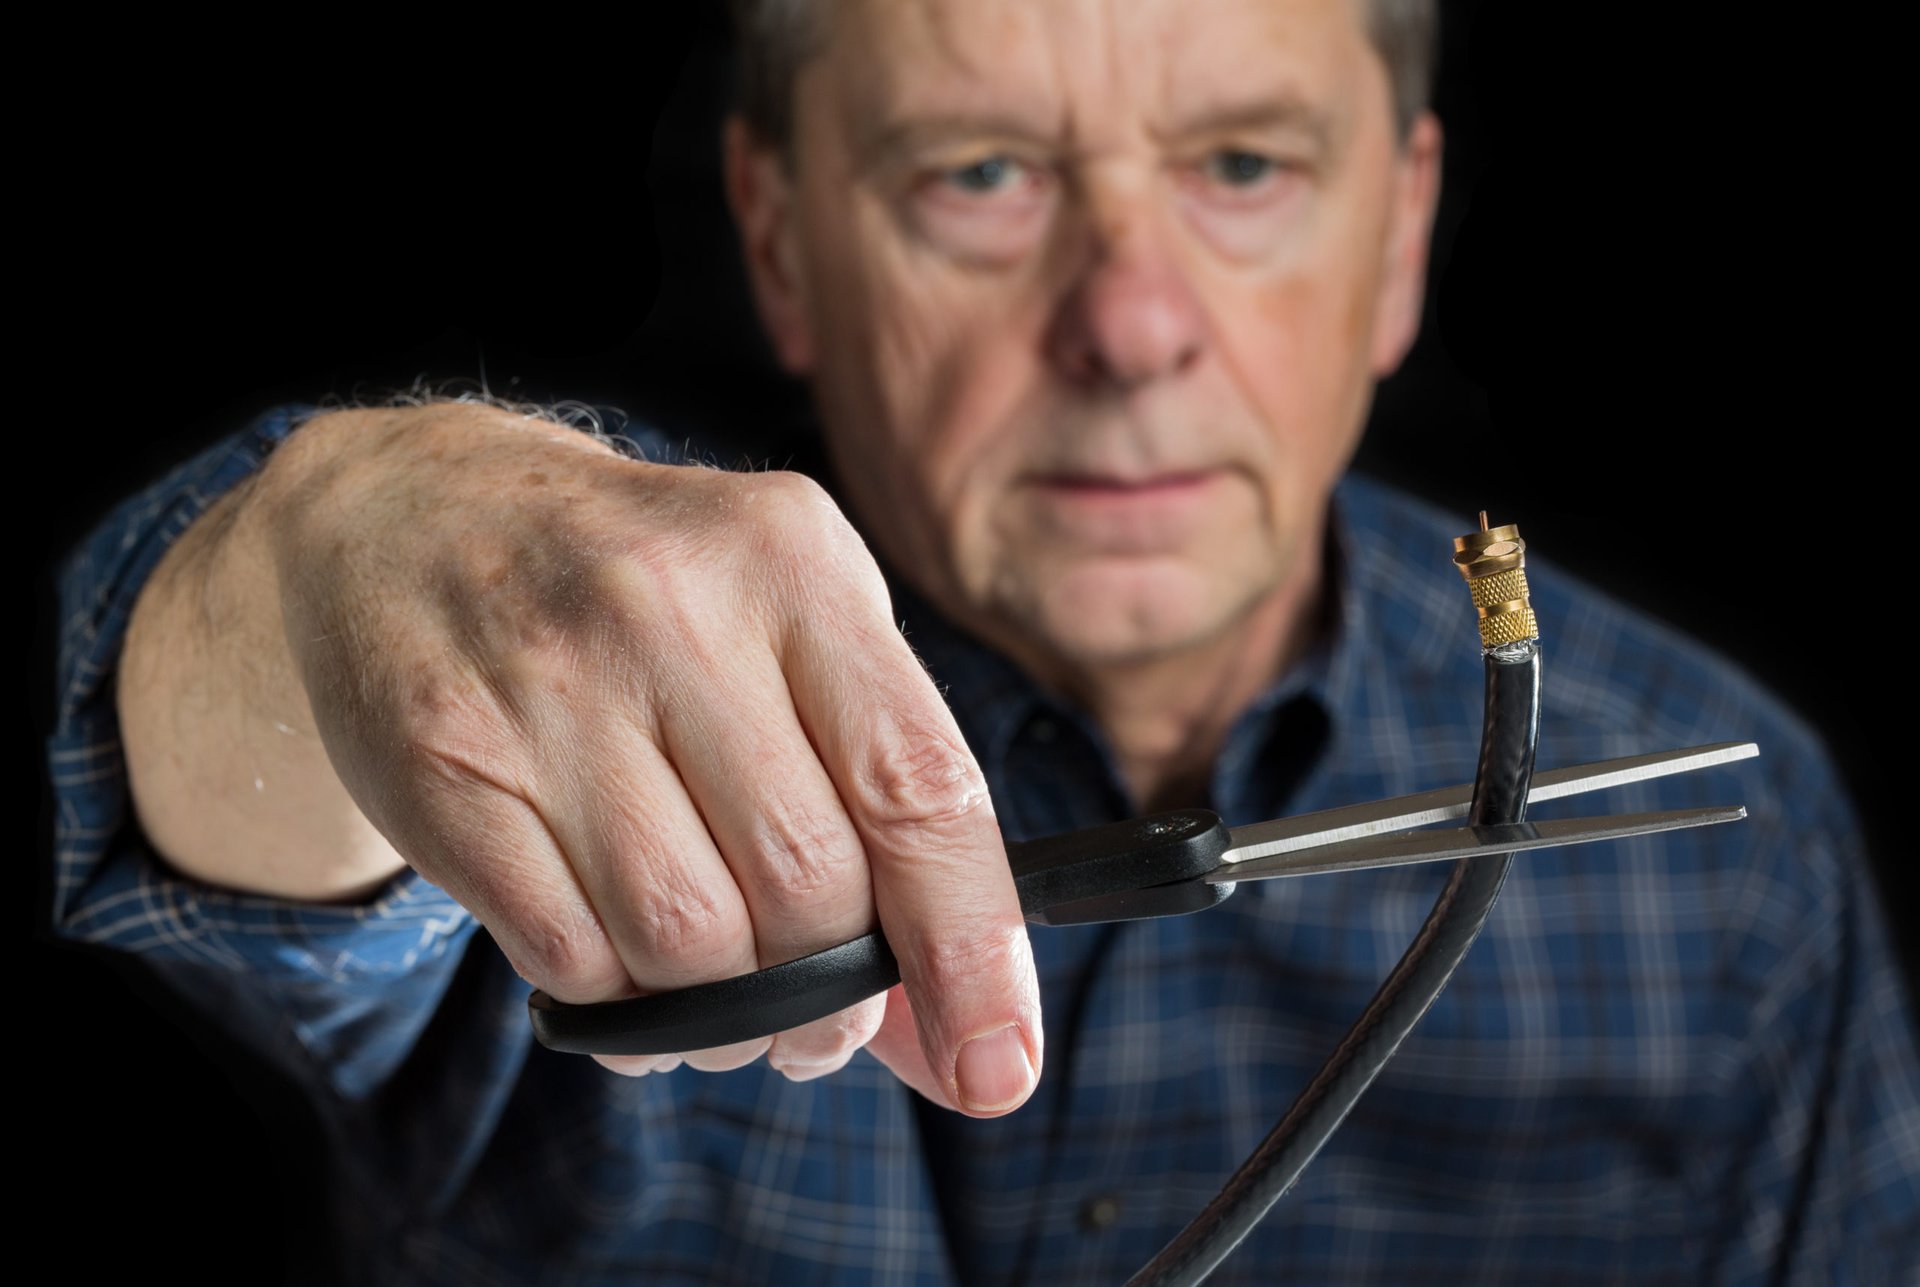 Older man cutting the cord and cancelling cable TV